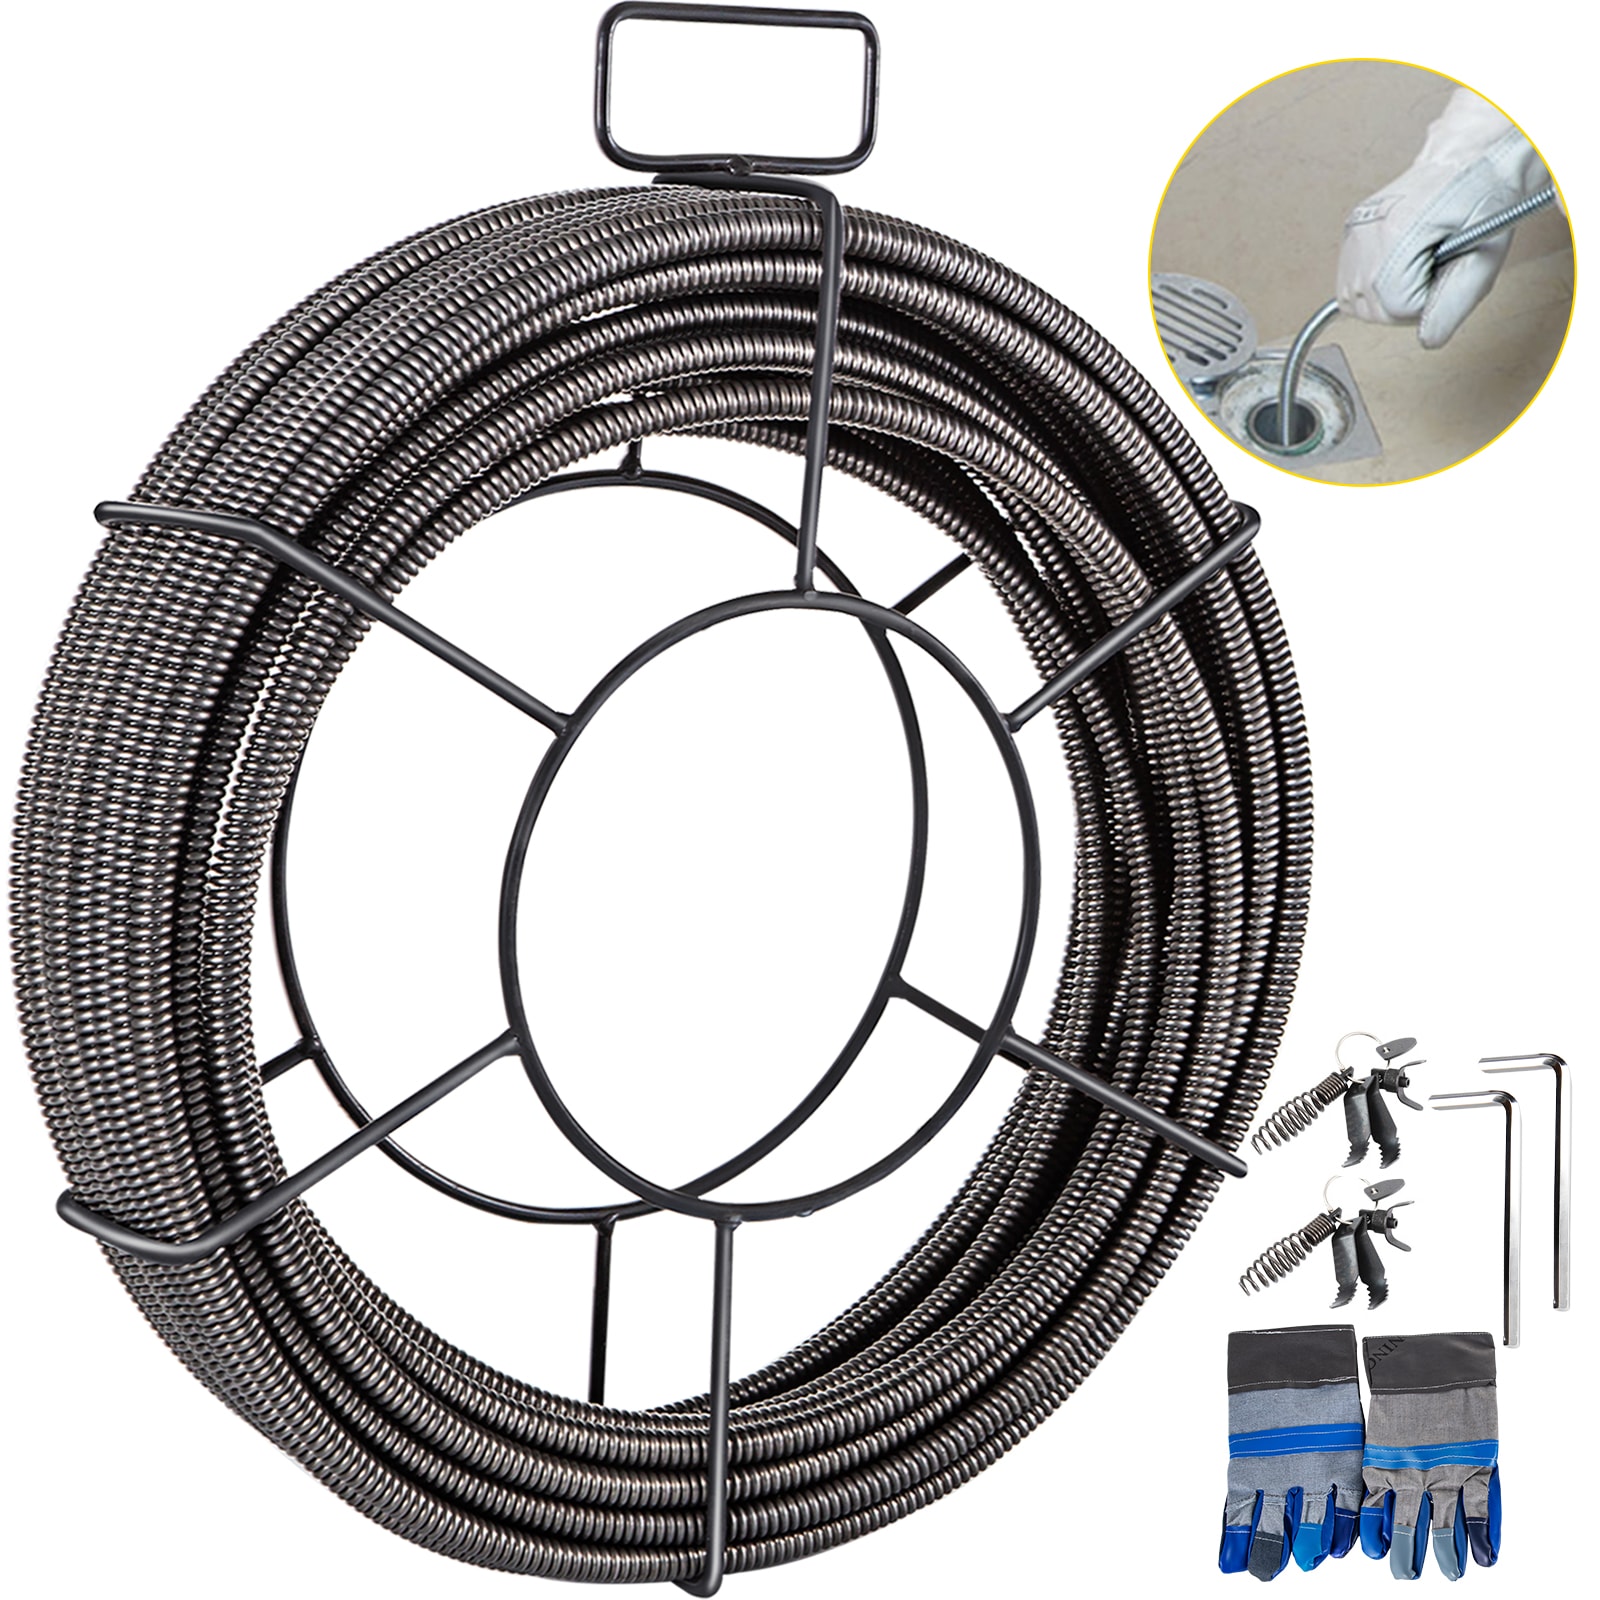 Extreme Safety : BrassCraft® Zip-it® BC00400 Manual Drain Cleaning